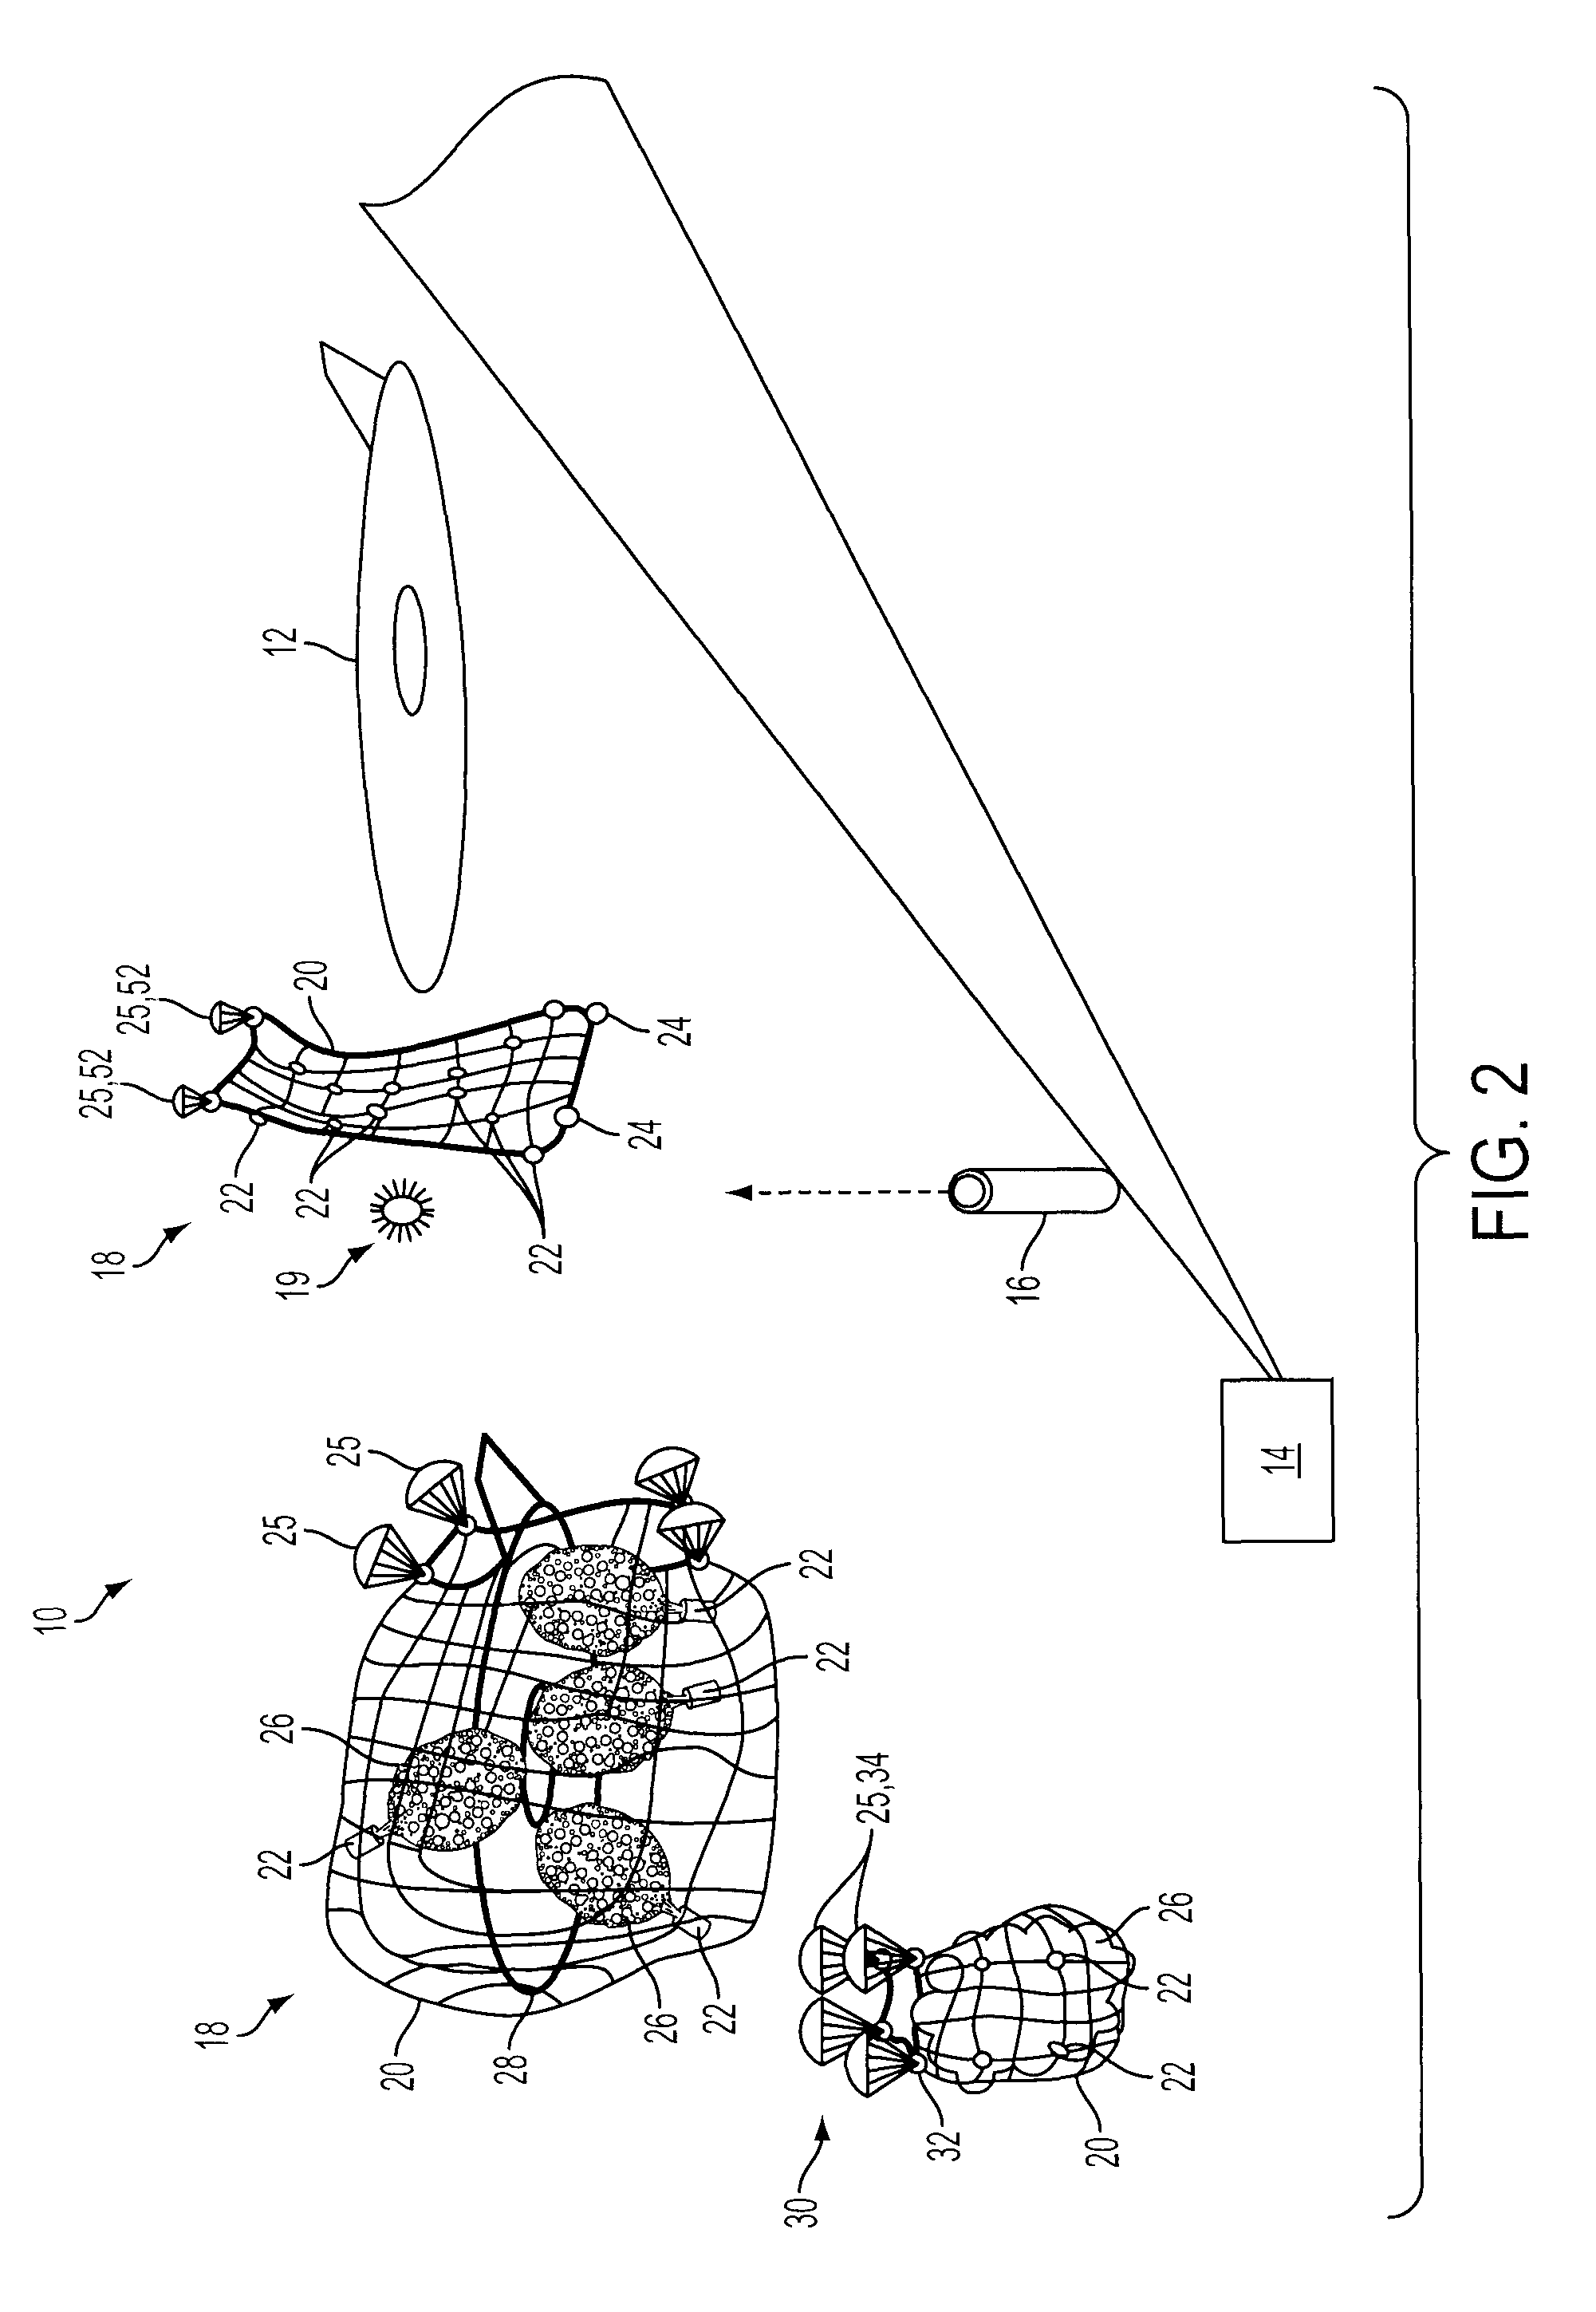 Catch and snare system for an unmanned aerial vehicle